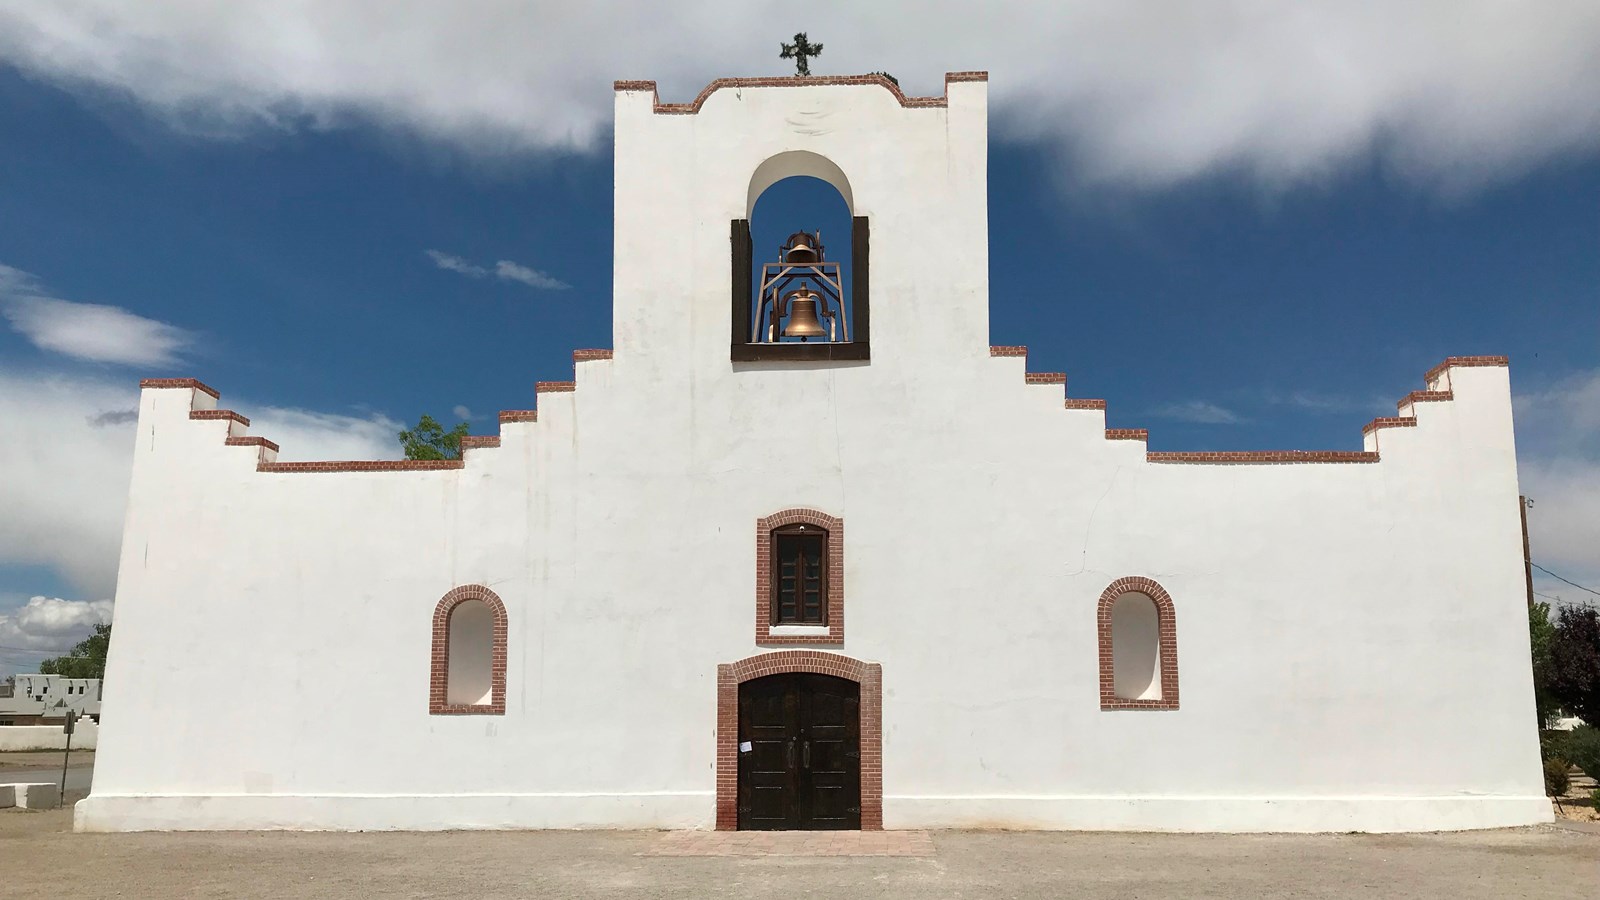 A white adobe one-story spanish mission with a single bell tower.